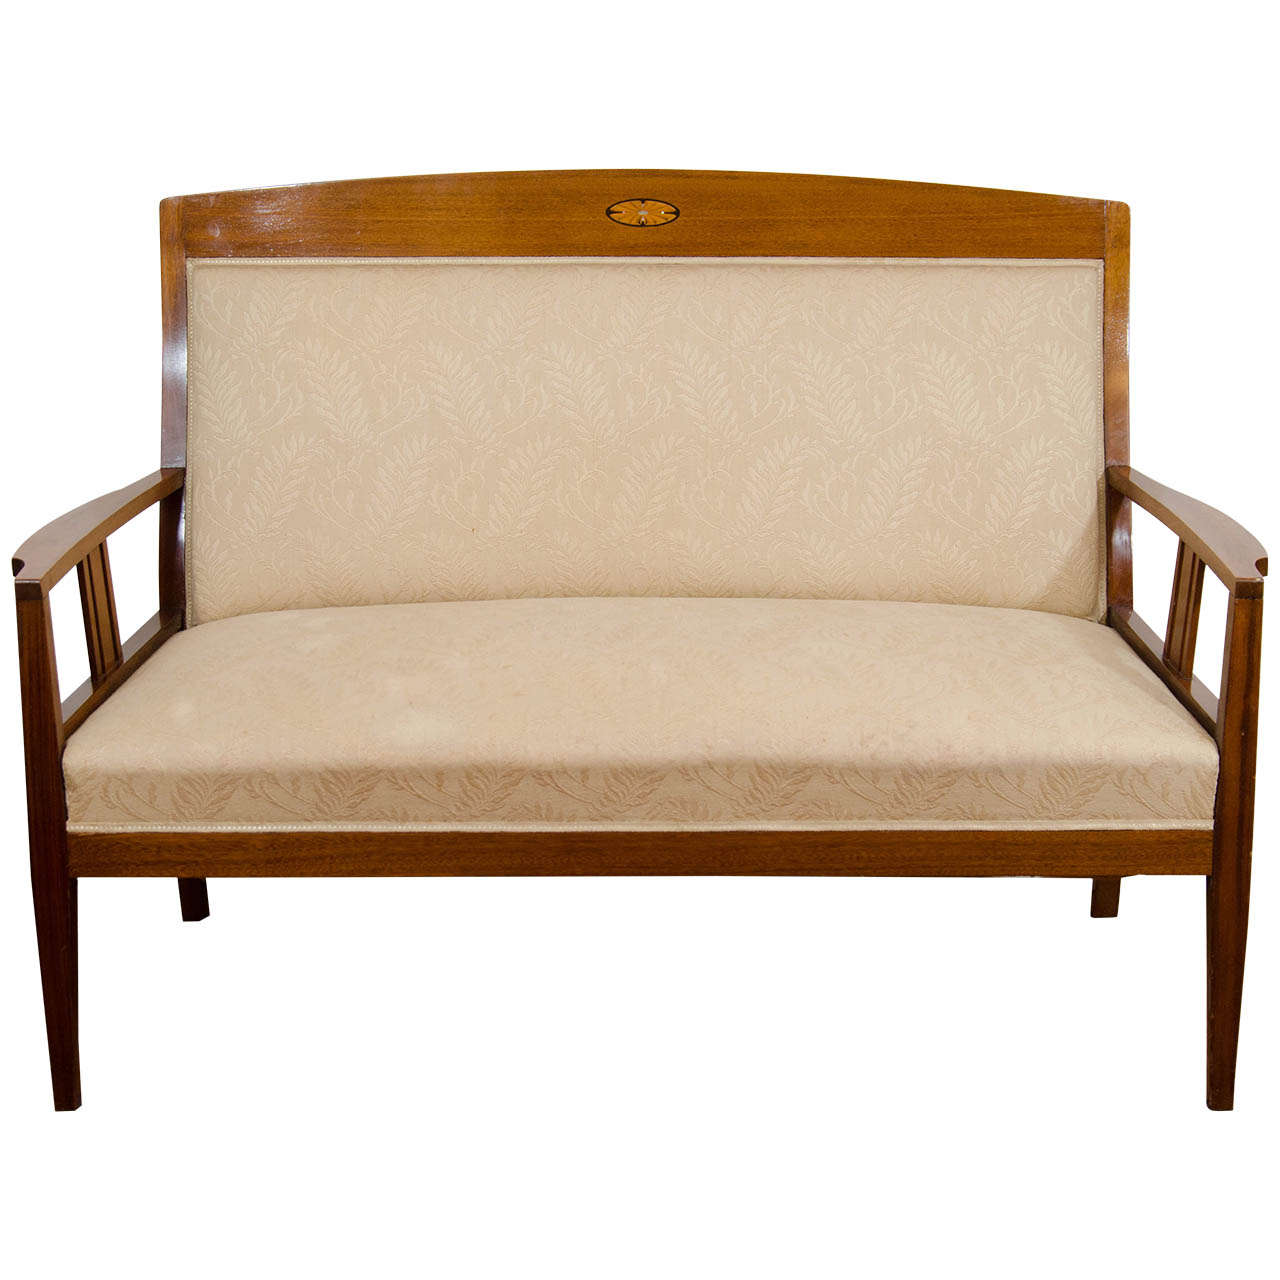 Jugendstil Settee with Ebony, Birch and Mother-of-Pearl Inlay For Sale